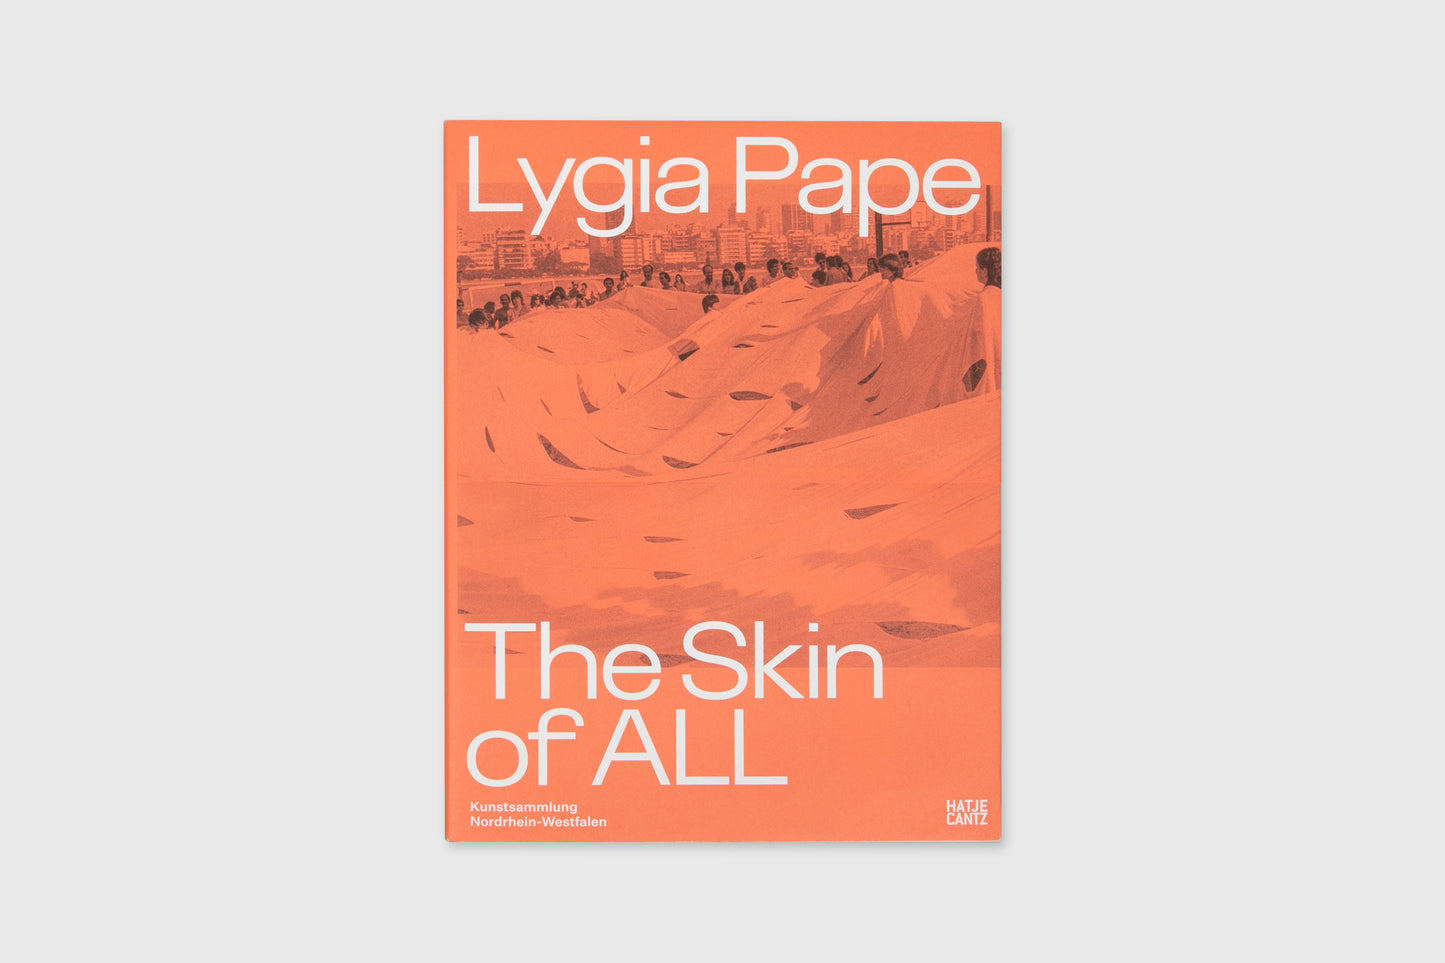 Lygia Pape: The Skin of All